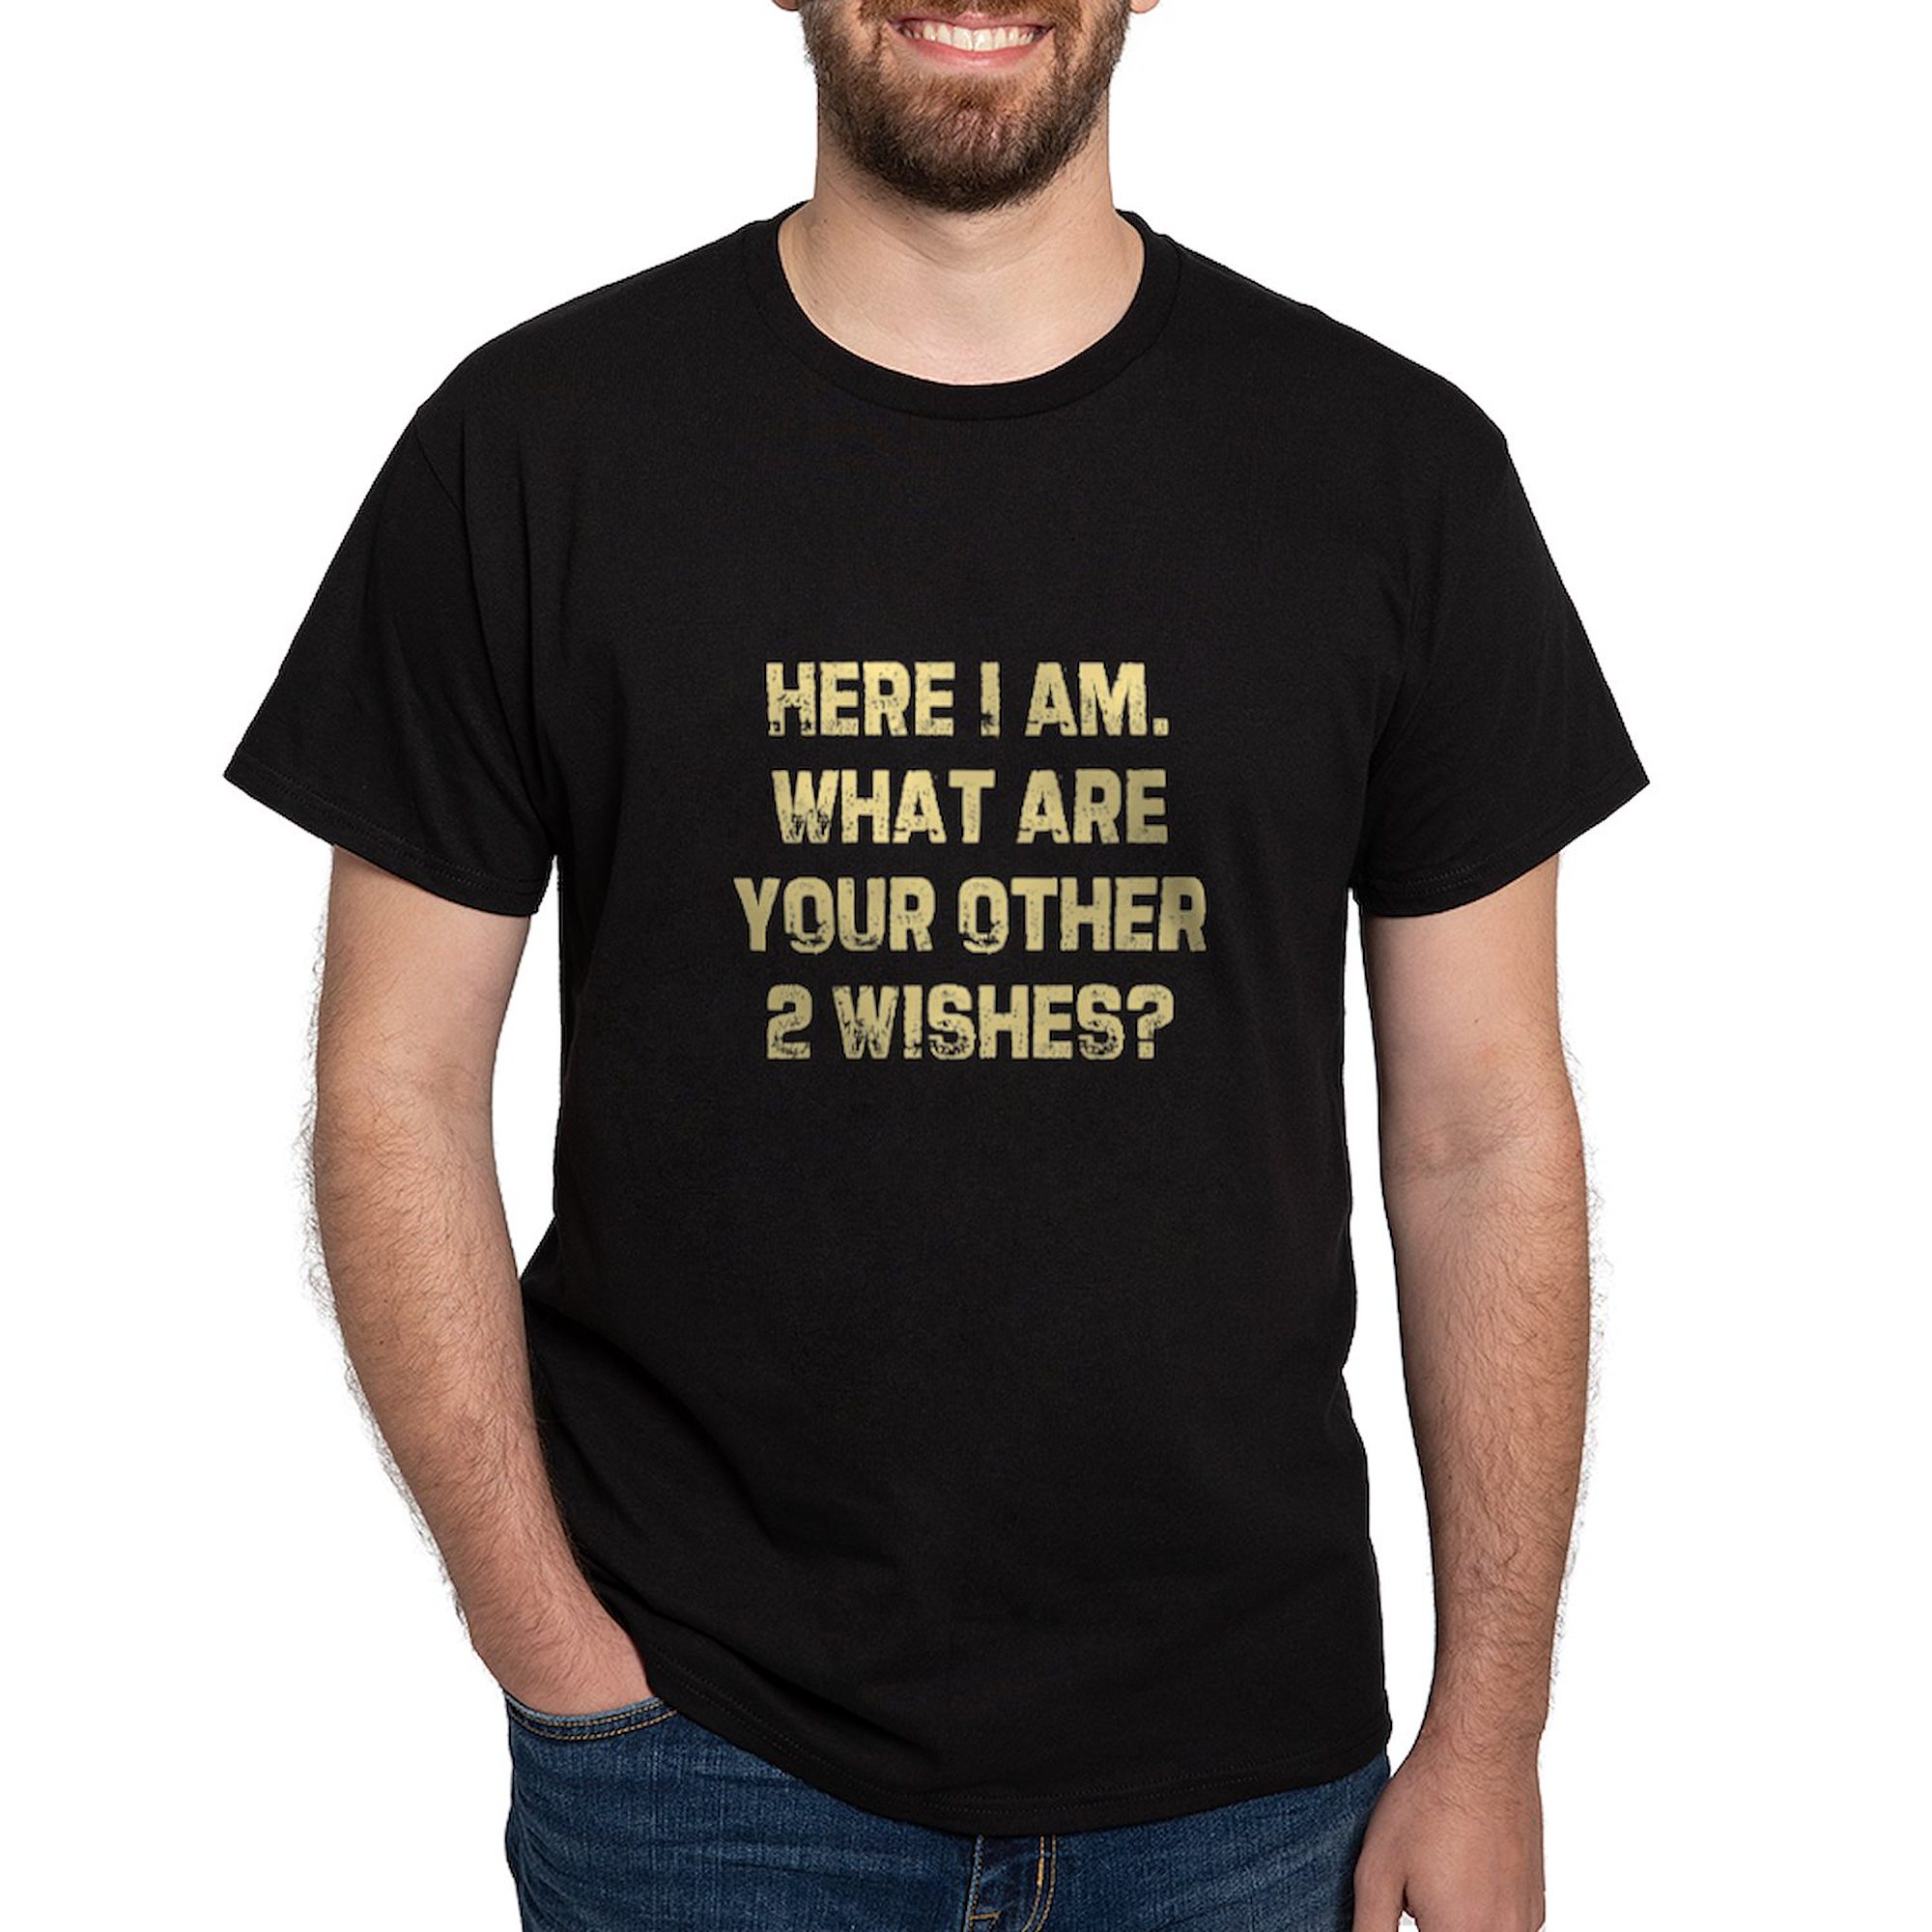 CafePress - Here I Am. What Are Your Othe Dark T Shirt - 100% Cotton T-Shirt - image 1 of 4